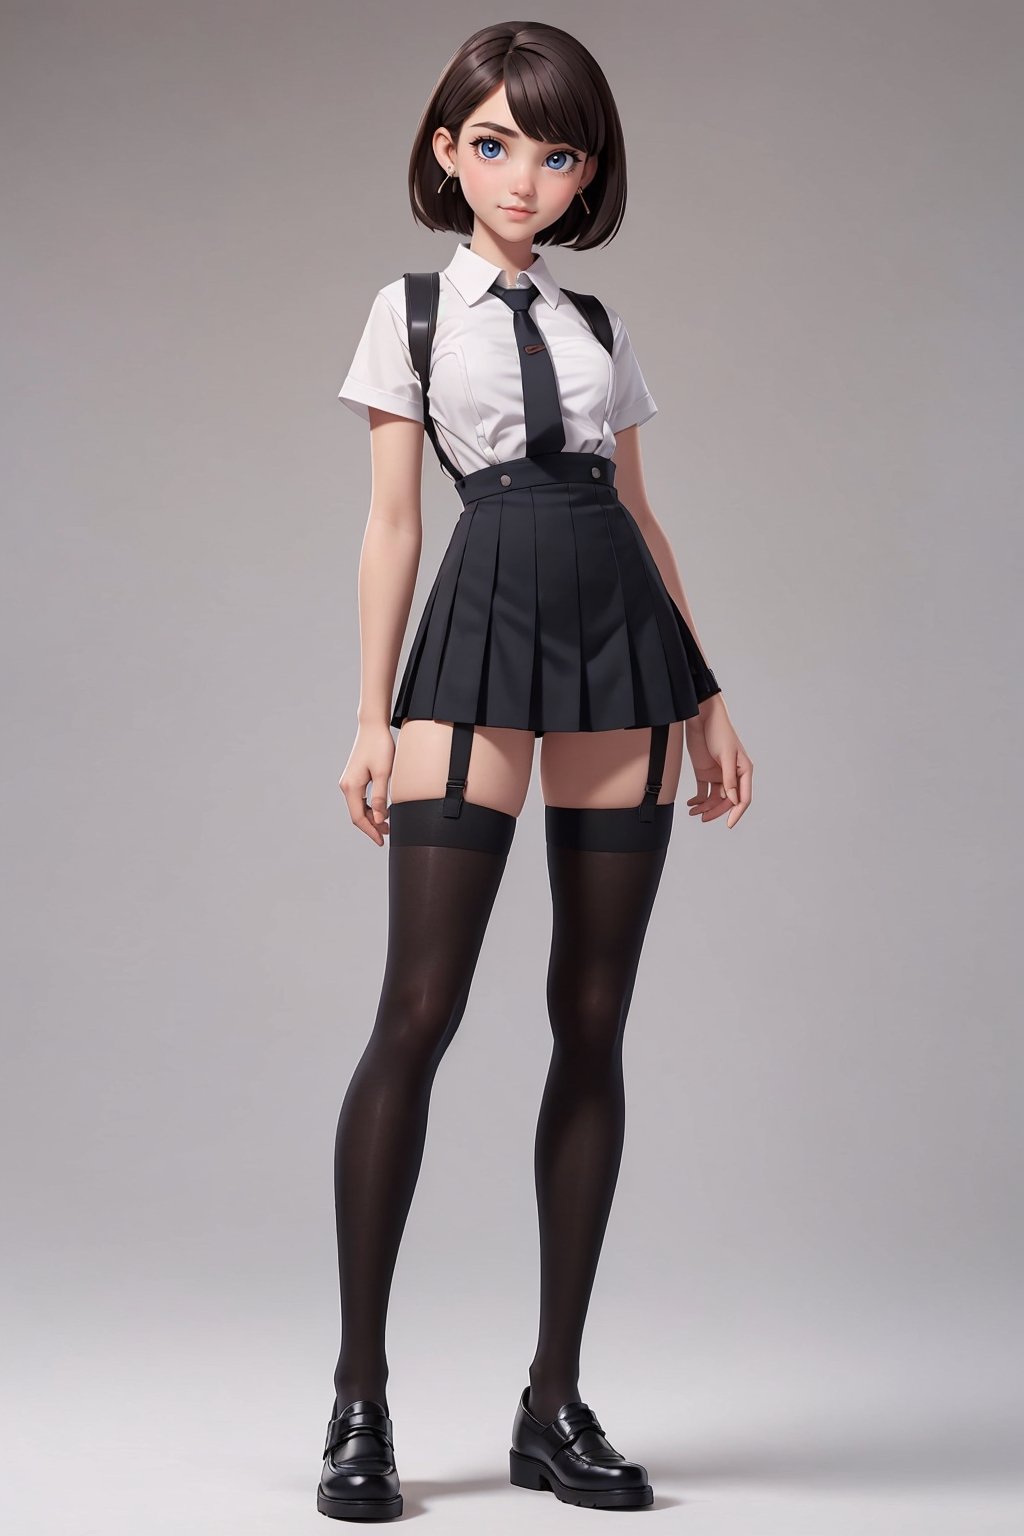 character sheet, student clothes, beautiful, good hands, full body, looking to the camera, good body, 18 year old girl body, school shoes, school skirt, school shirt, black shoes, sexy pose, full_body, with small earrings, character_sheet, fashionable hairstyle, school_uniform, shoes_black, with  school_shoes_black, arcane style, clothes with accessories, denier tights in beige, stockings_colorbeige, Reclaimed Vintage side cut out tights in black, clothes sexy, Bluebella garter suspender in black,brown hair, straight hair, fair skin, light eyes,
red flower in her hair